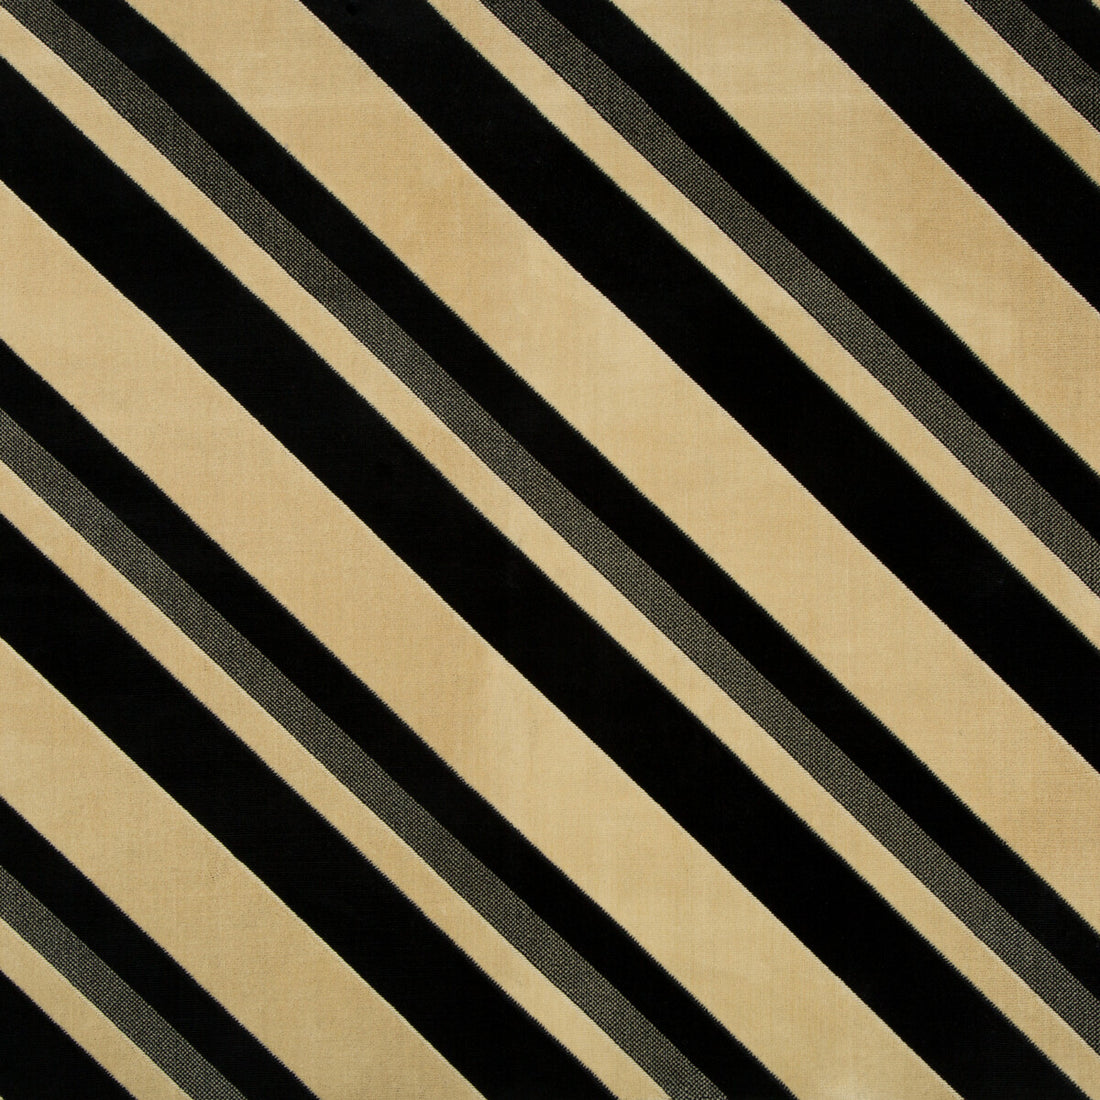 Sereno Stripe fabric in malt/onyx color - pattern GWF-3732.168.0 - by Lee Jofa Modern in the Kelly Wearstler IV collection